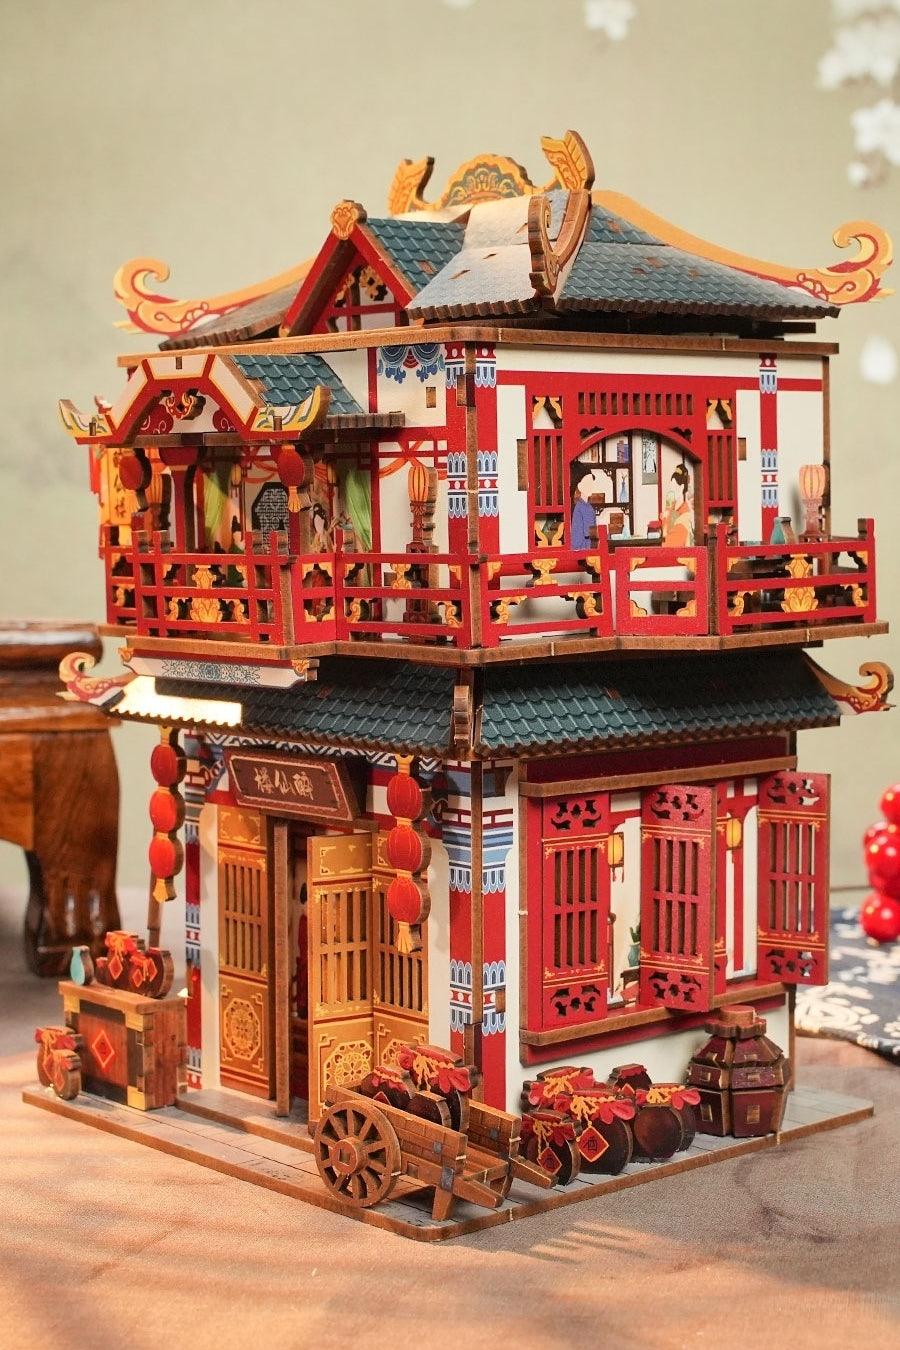 ancient Chinese restaurant themed diy 3D wooden puzzles for adults - side view